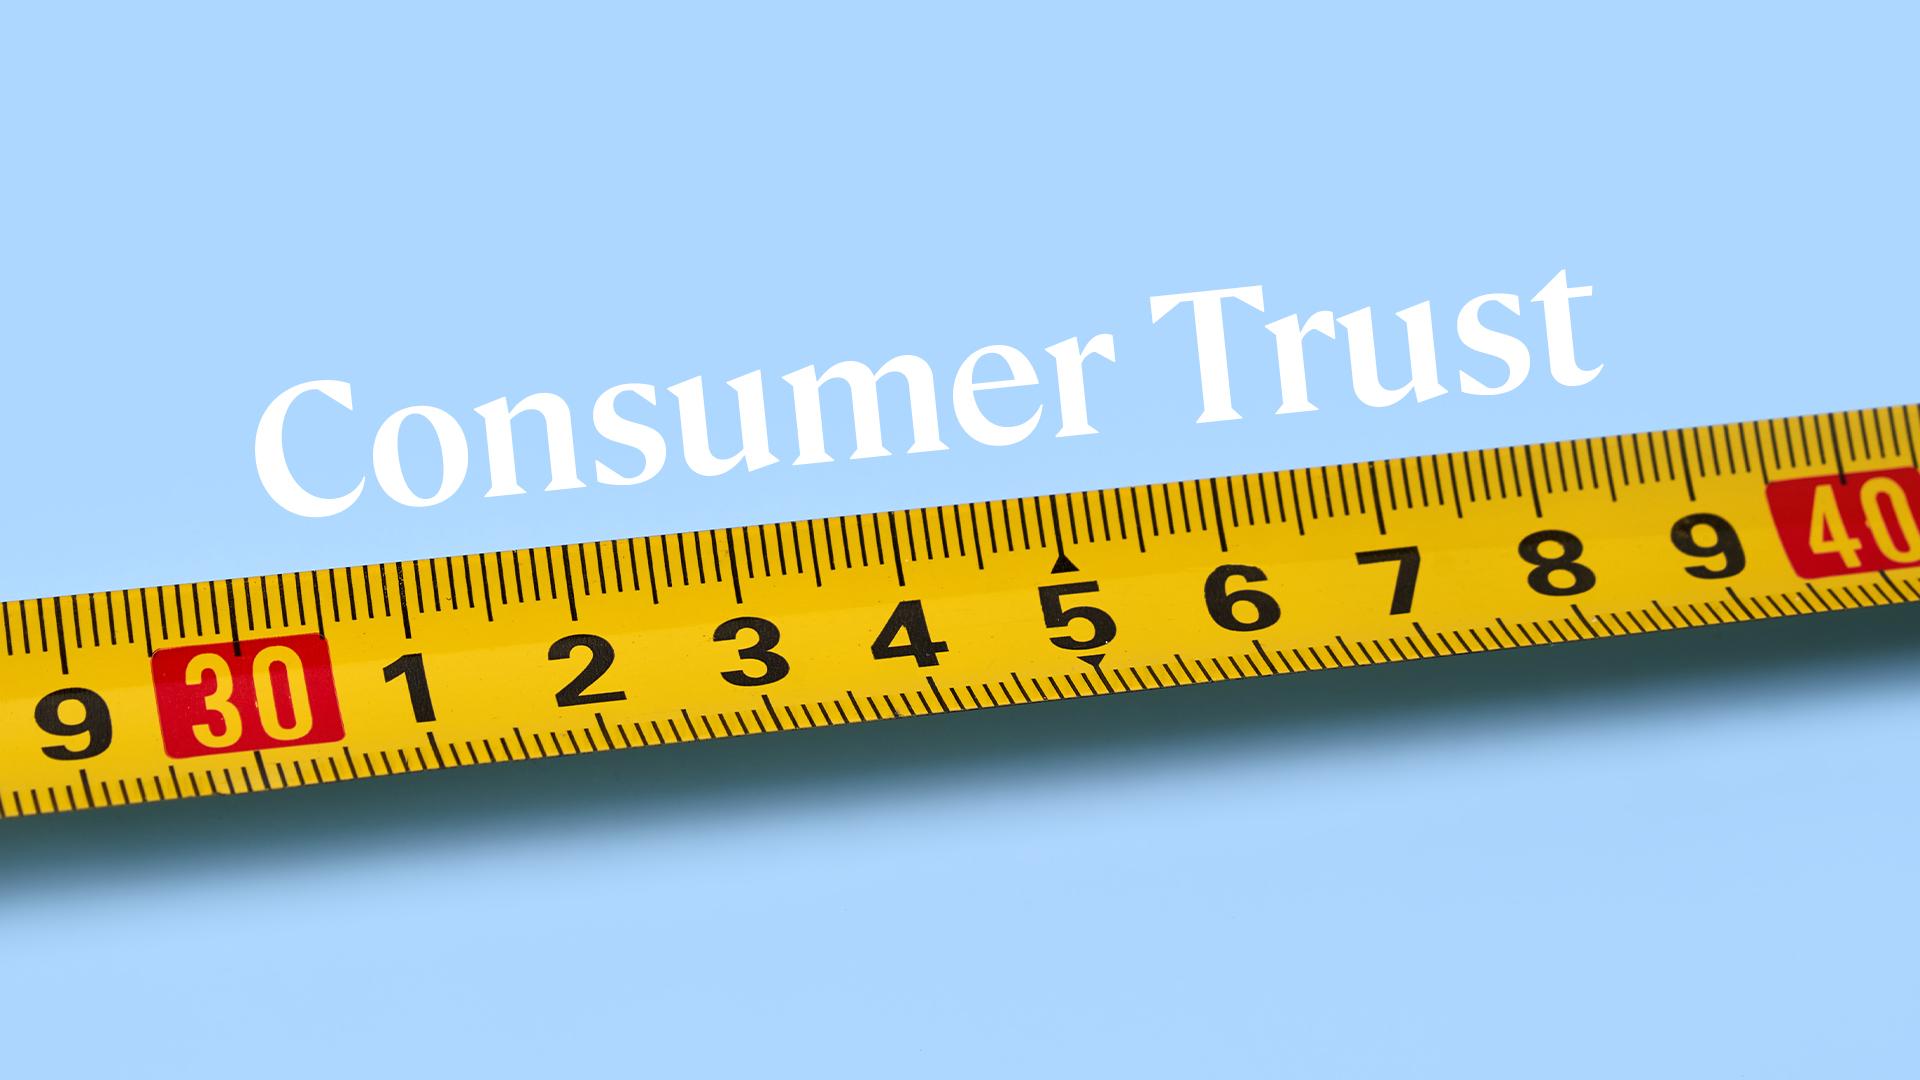 Consumer Trust displayed over a ruler